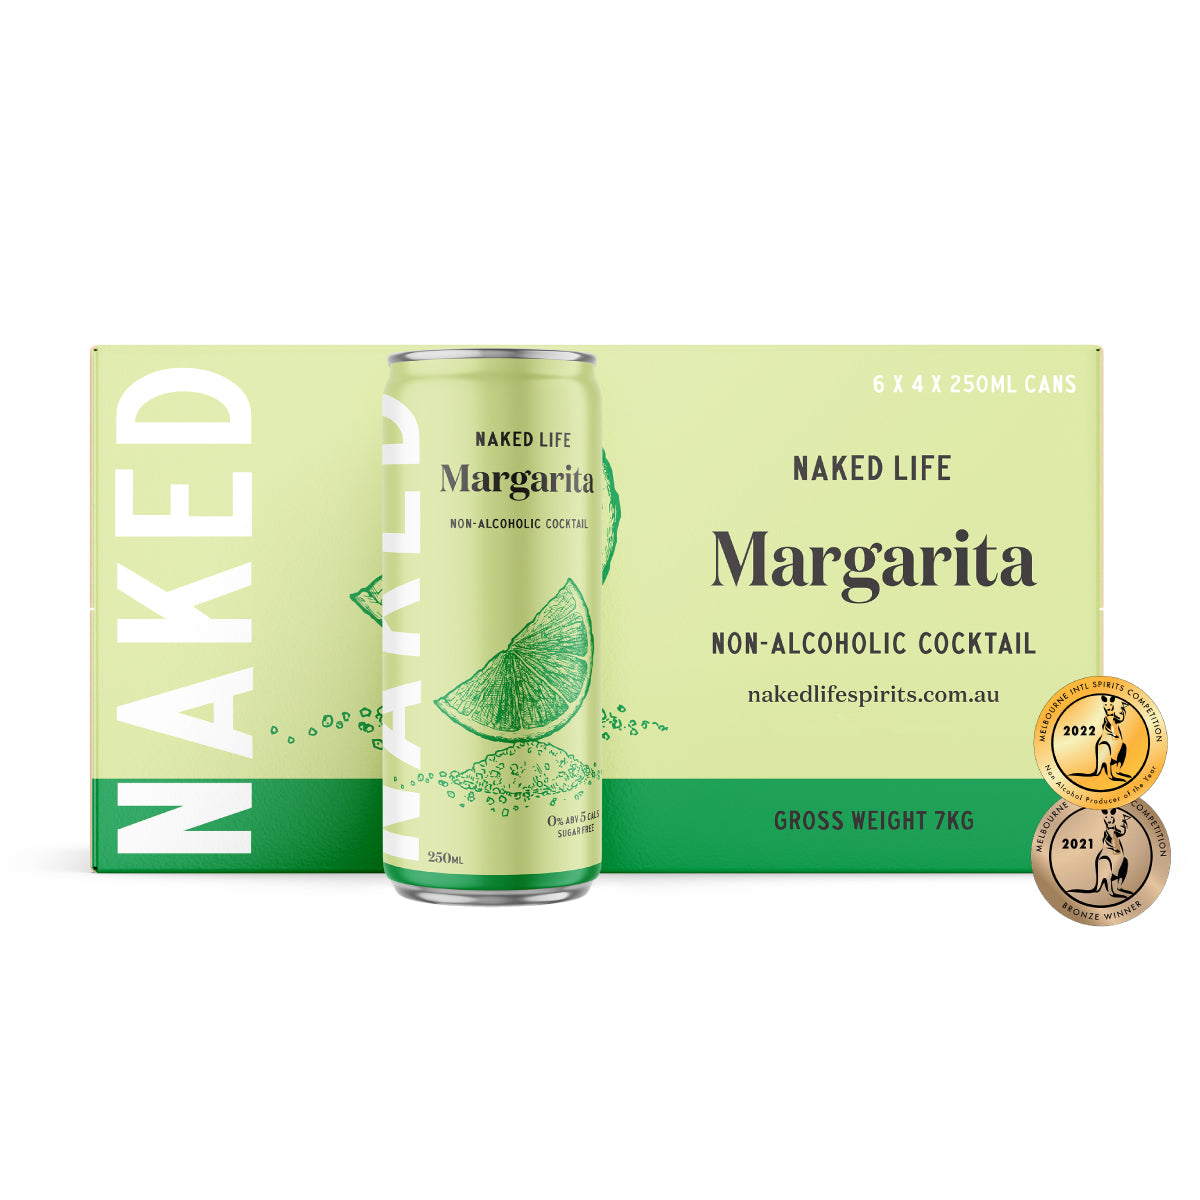 Naked Life Non-Alcoholic Cocktail Margarita - 6 x 4 x 250ml Cans